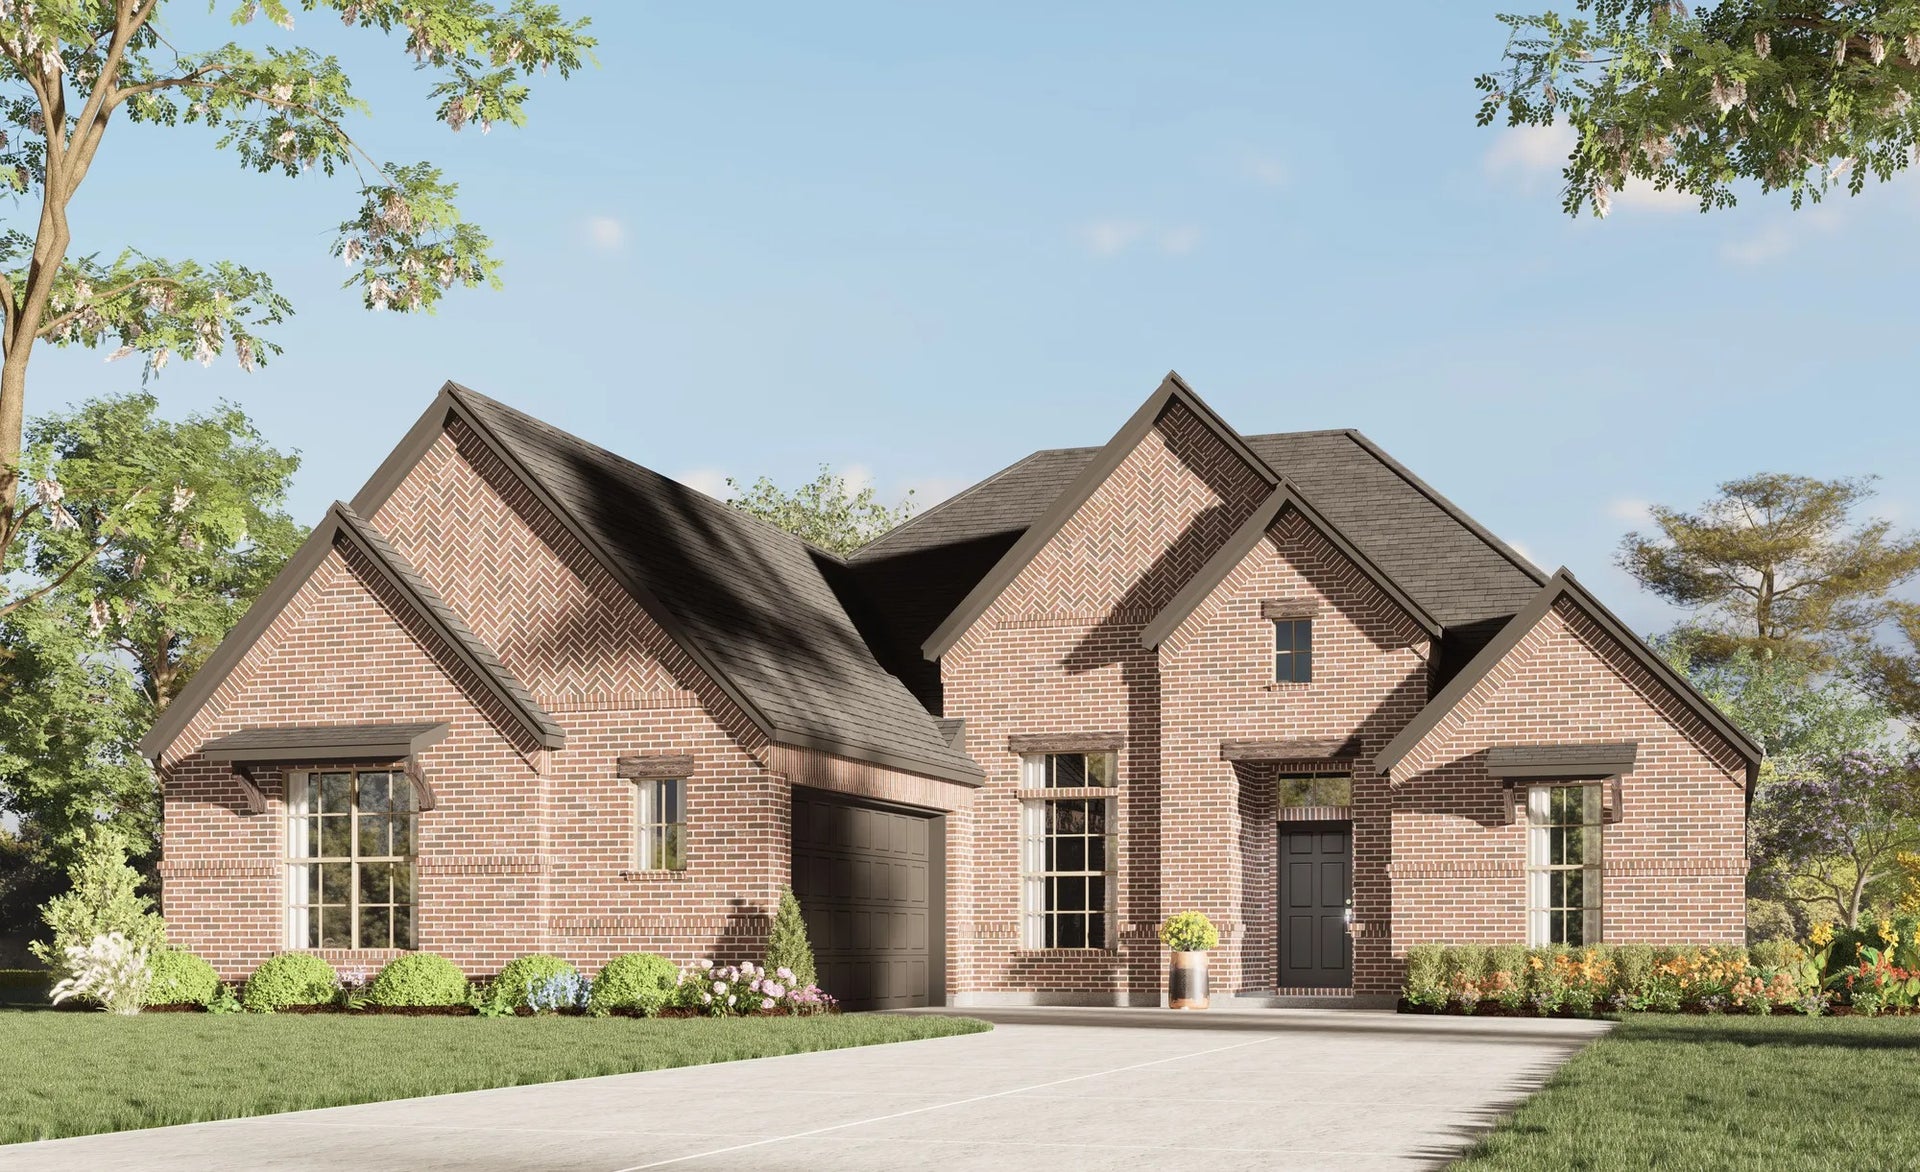 2370 C. 4br New Home in Midlothian, TX